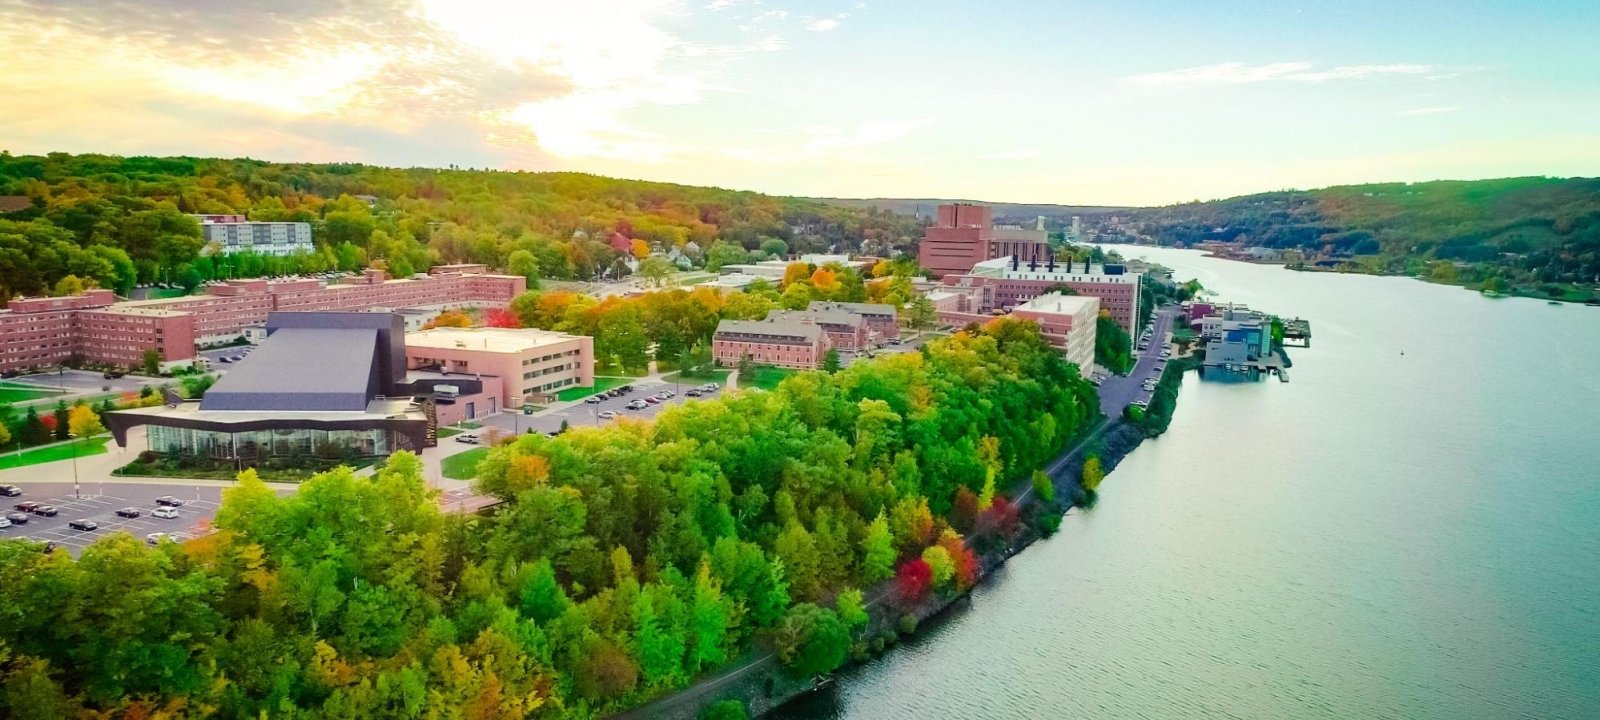 Michigan Tech campus in early autumn, featuring the Portage Canal.